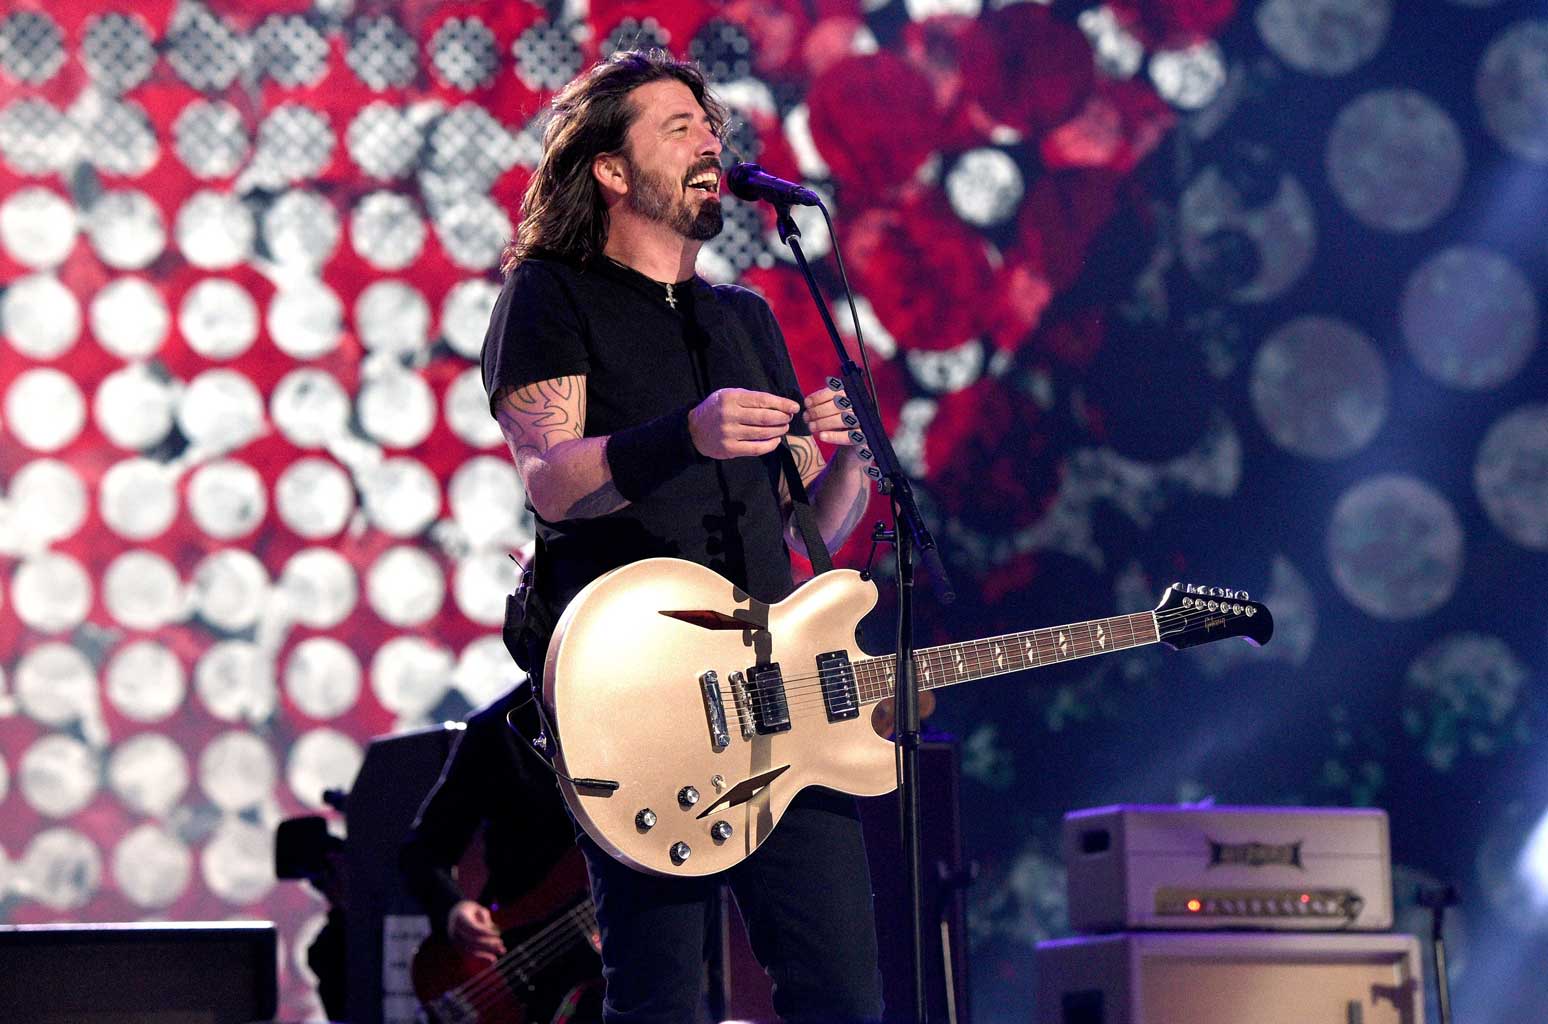 Watch Dave Grohl Rock Denver with a Surprise Cover of Tenacious D’s ‘Tribute’